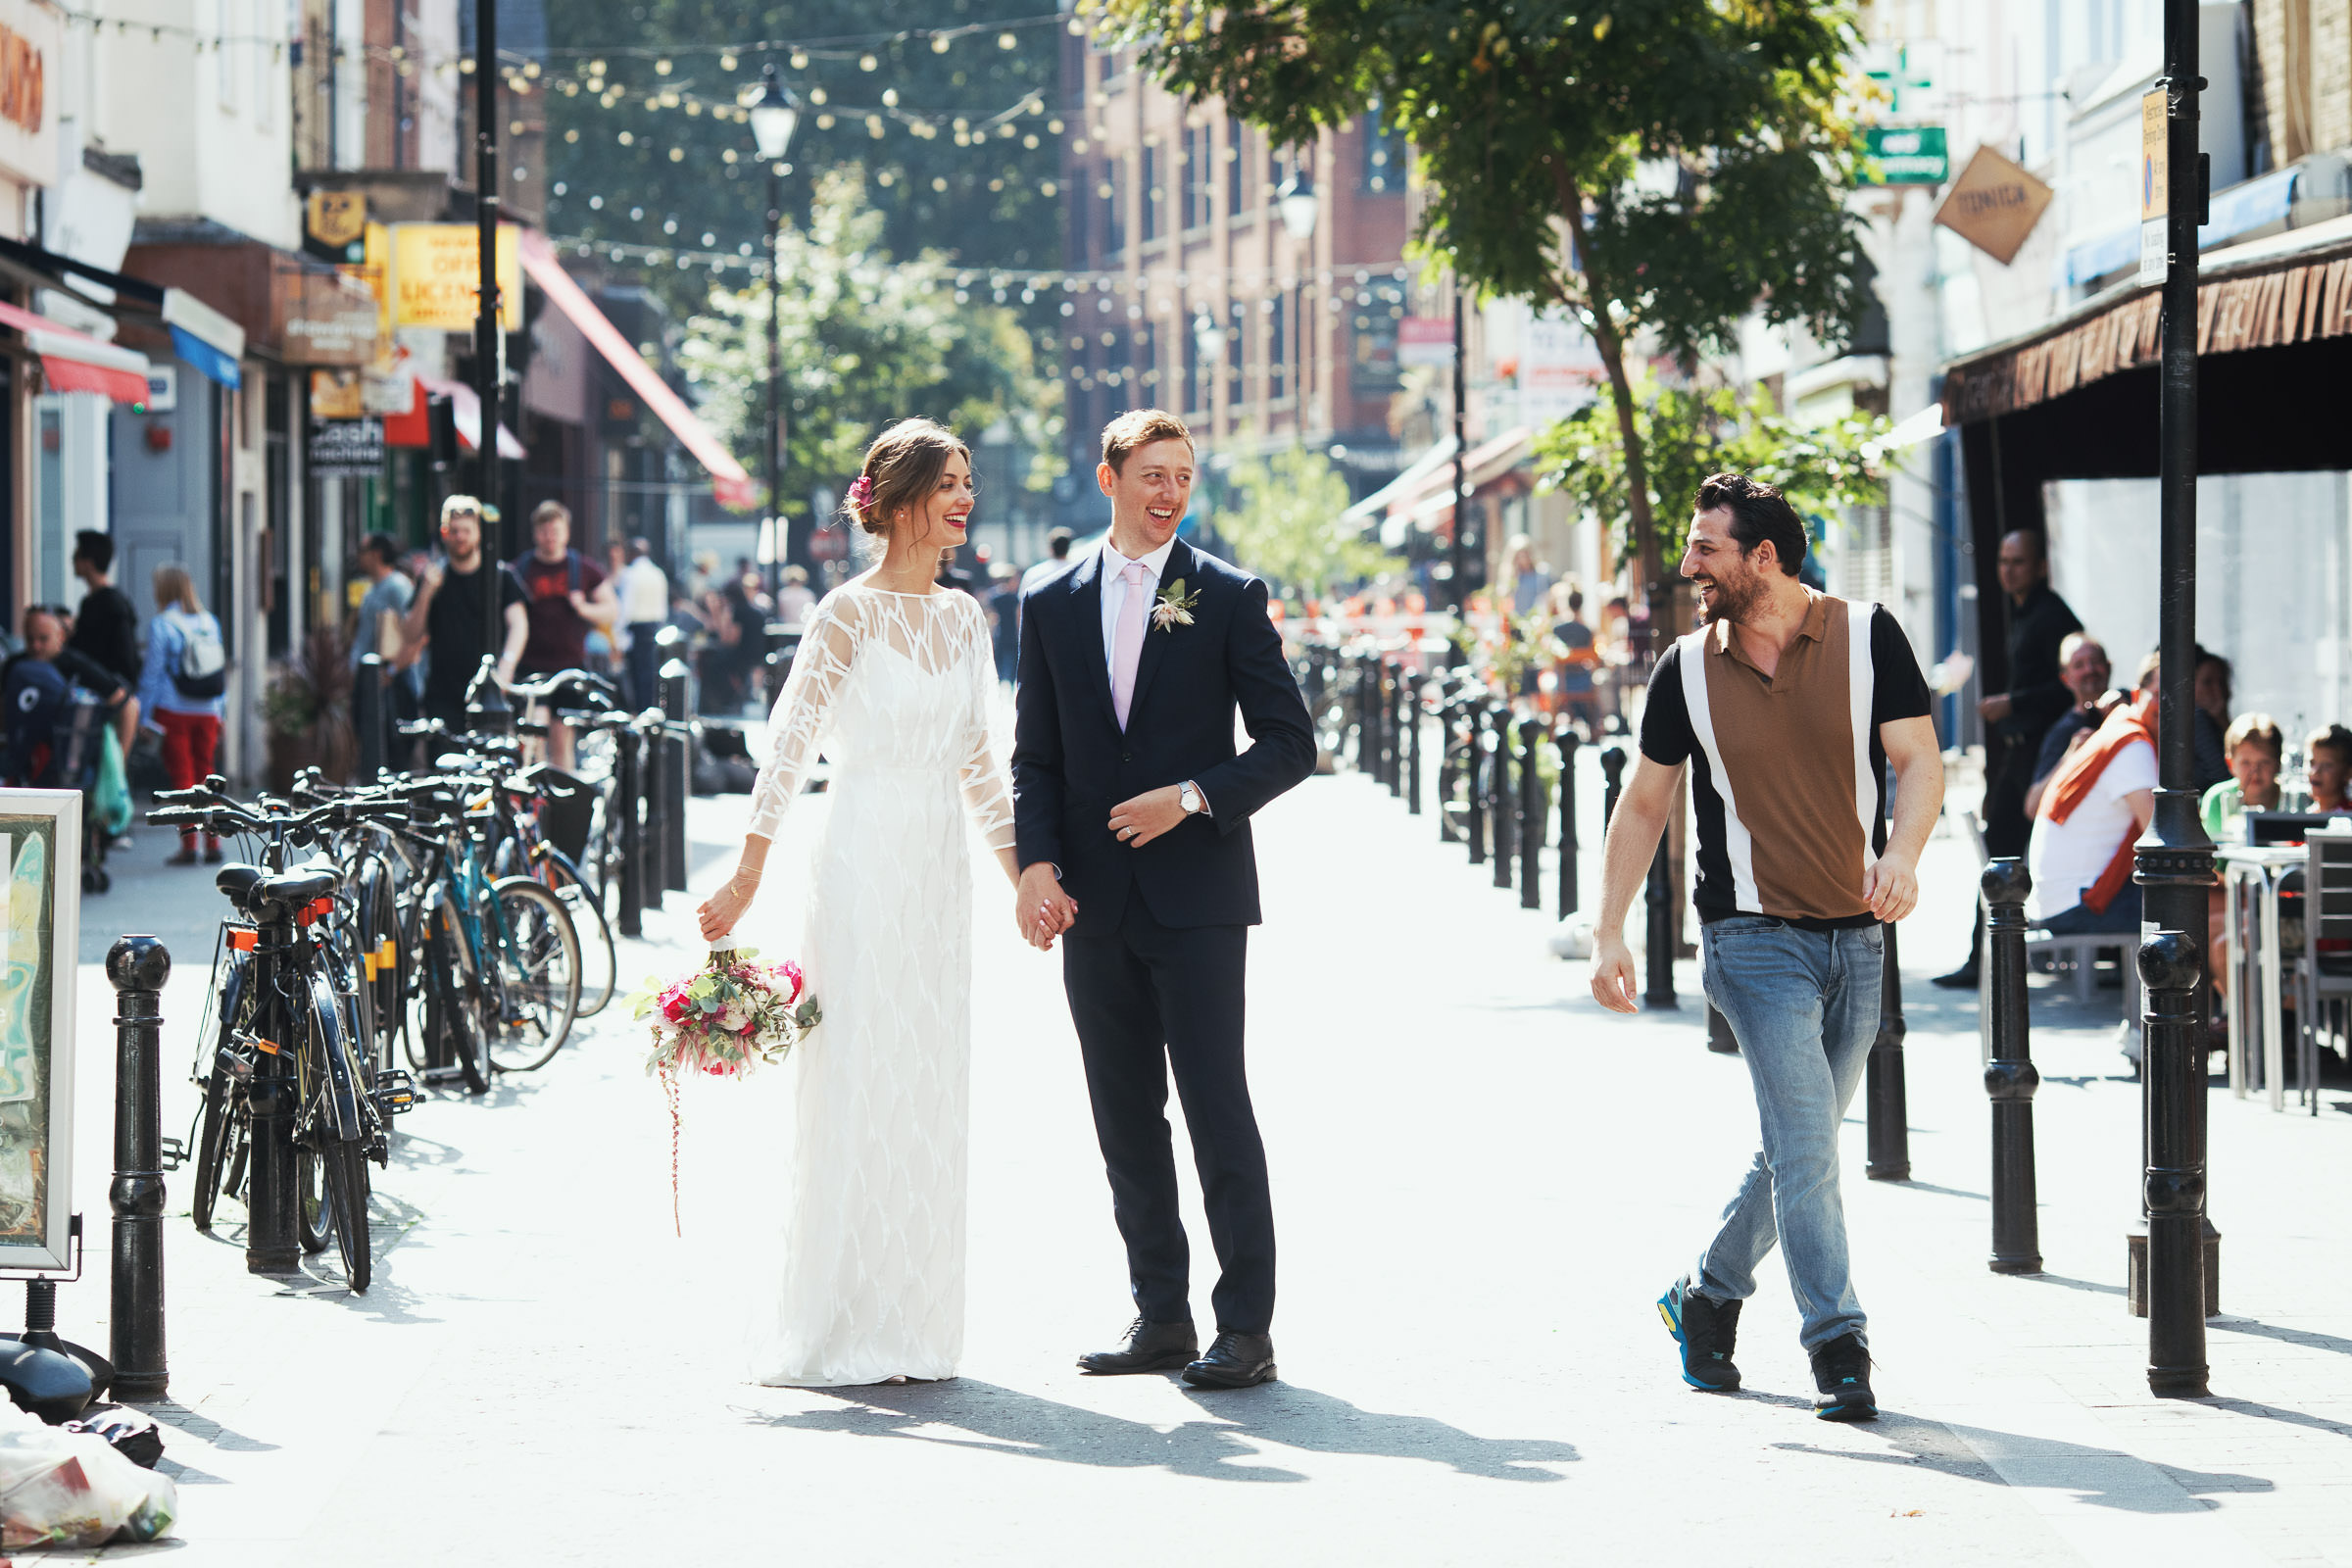 Natural London wedding photography. Bride and groom in Exmouth Market after their wedding at Union Chapel. A stranger congratulates them. The bride is wearing Halfpenny. By documentary wedding photographer Tracy.